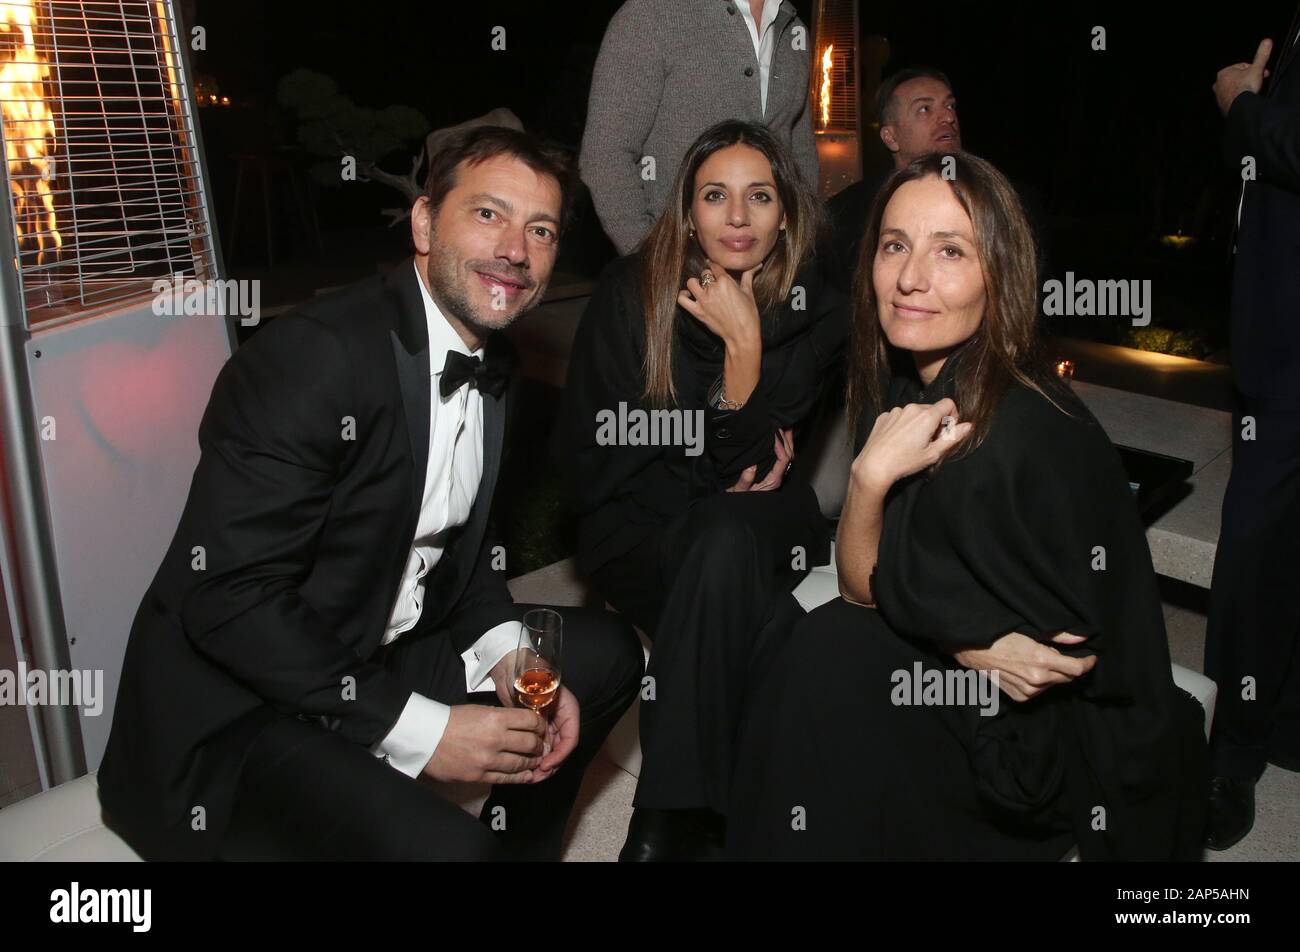 BEVERLY HILLS, CA - JANUARY 20: Claudia Gerini, Alessandro Del Piero, at the 2020 Filming Italy After Party at Eugenio Lopez's Residence in Beverly Hills, California on January 20, 2020. Credit: Faye Sadou/MediaPunch Stock Photo